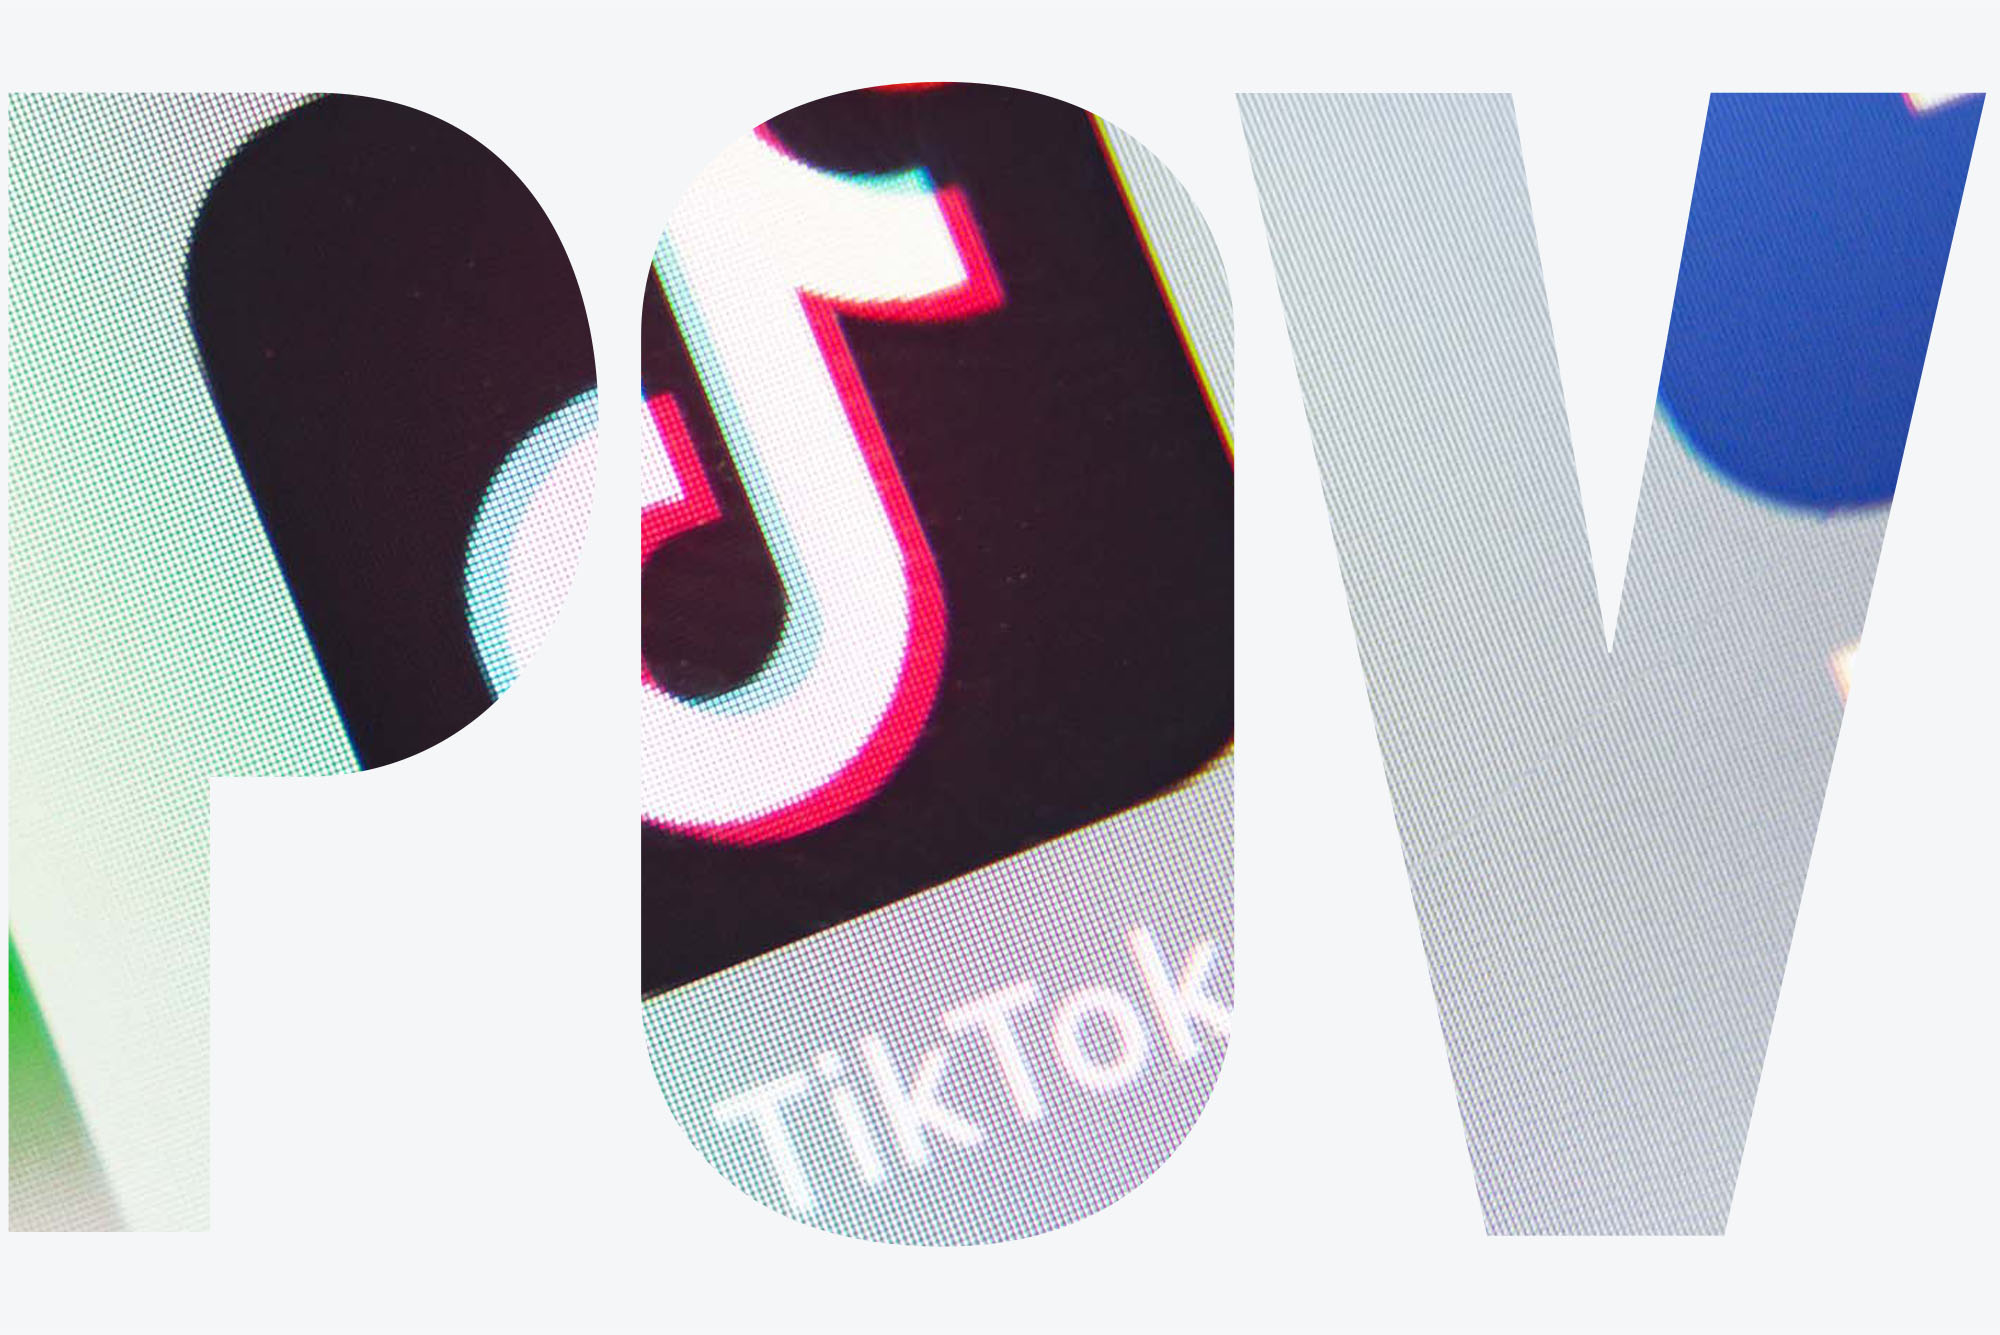 Photo: A screenshot of the "TikTok" app on an IPhone screen. The letters "POV" overlay the picture